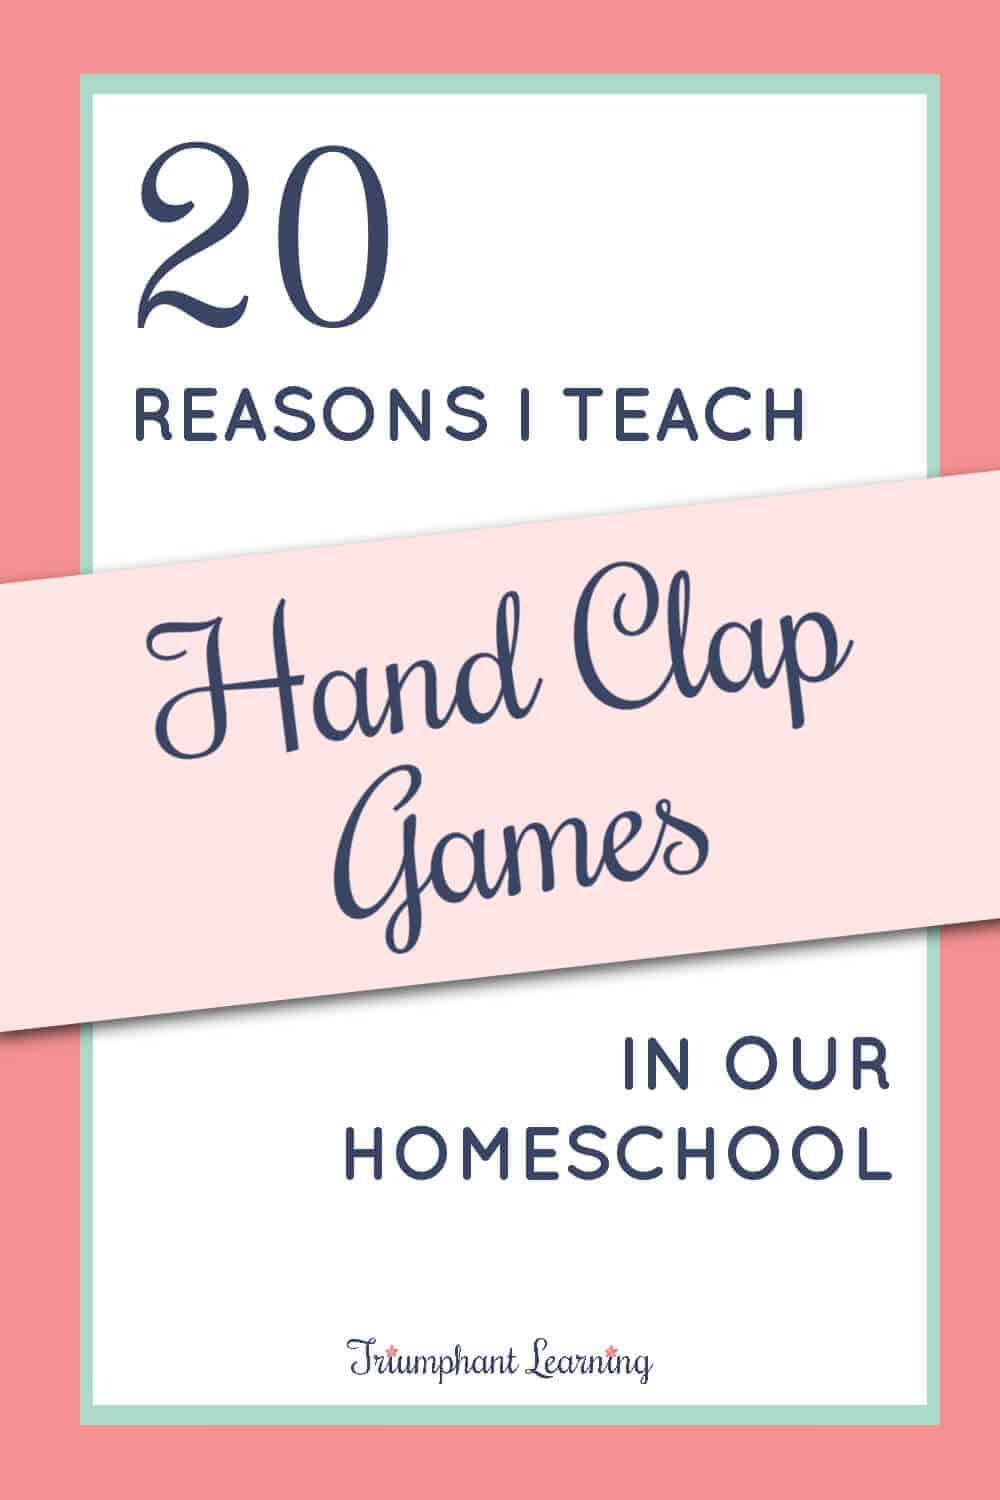 There are a lot of great reasons to teach hand clap games to your children. Here are 20 of the reasons I teach them to my children. via @TriLearning